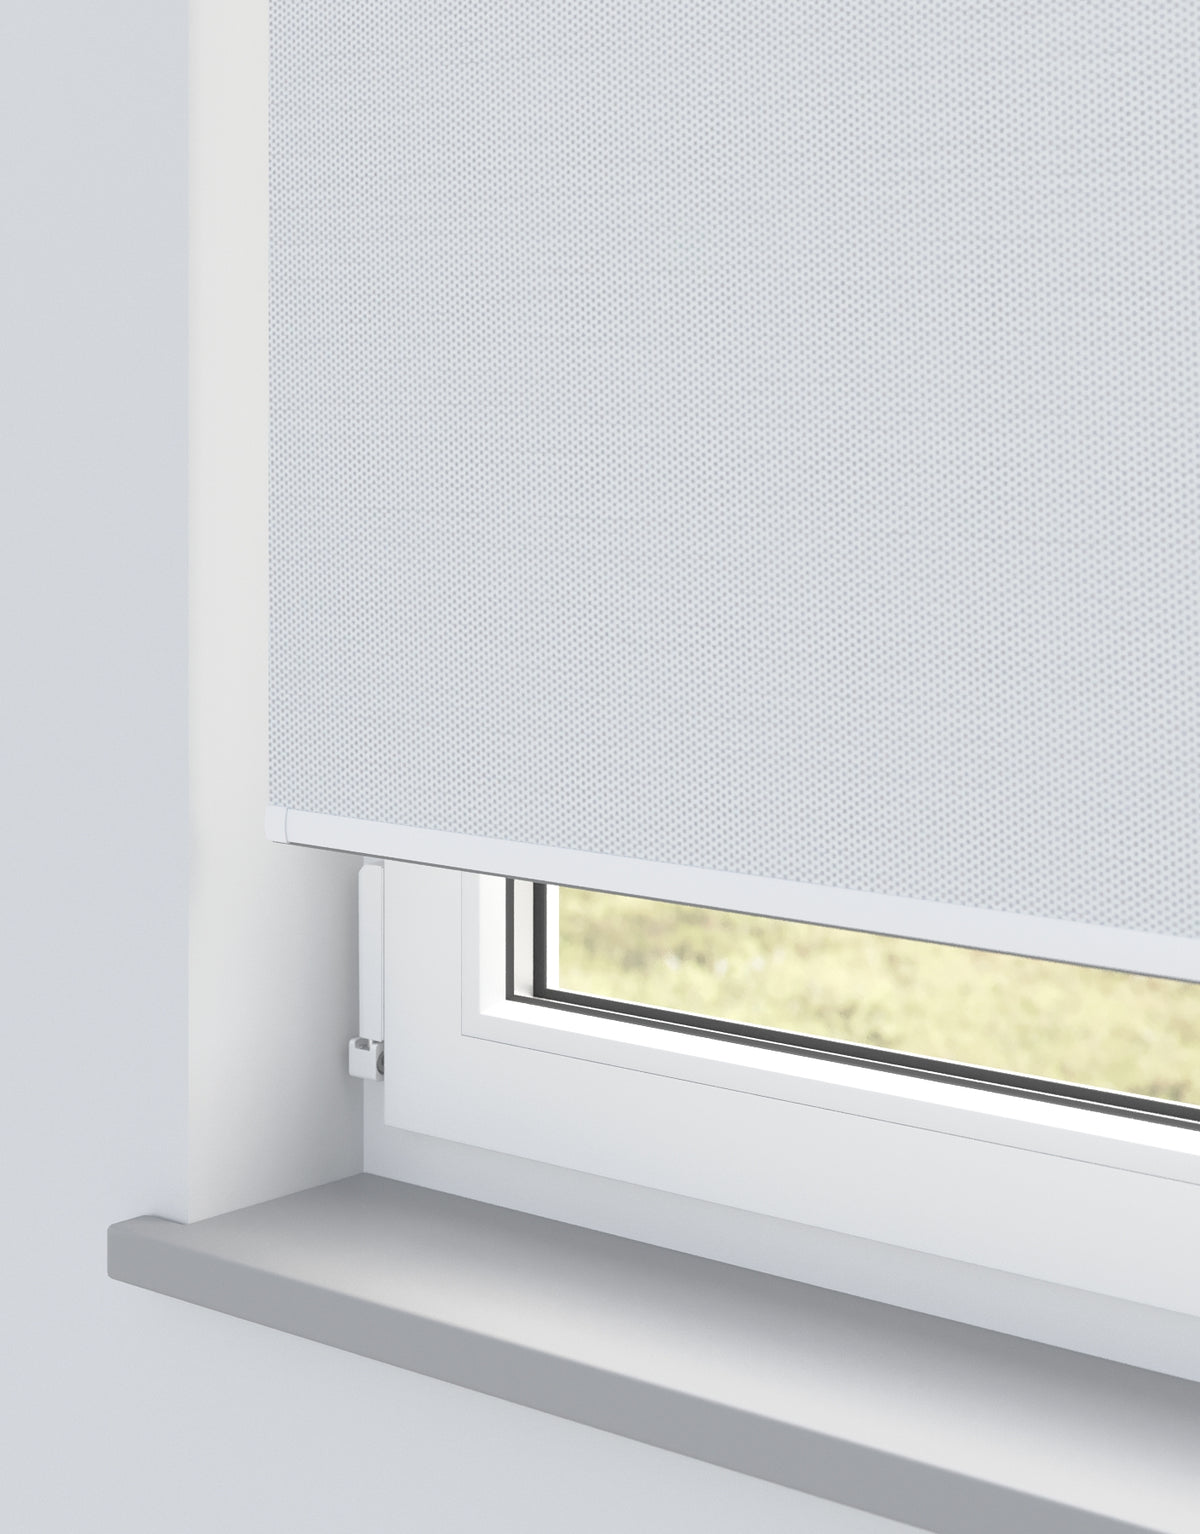 Panama Pro 3 White Pearl Roller Blind